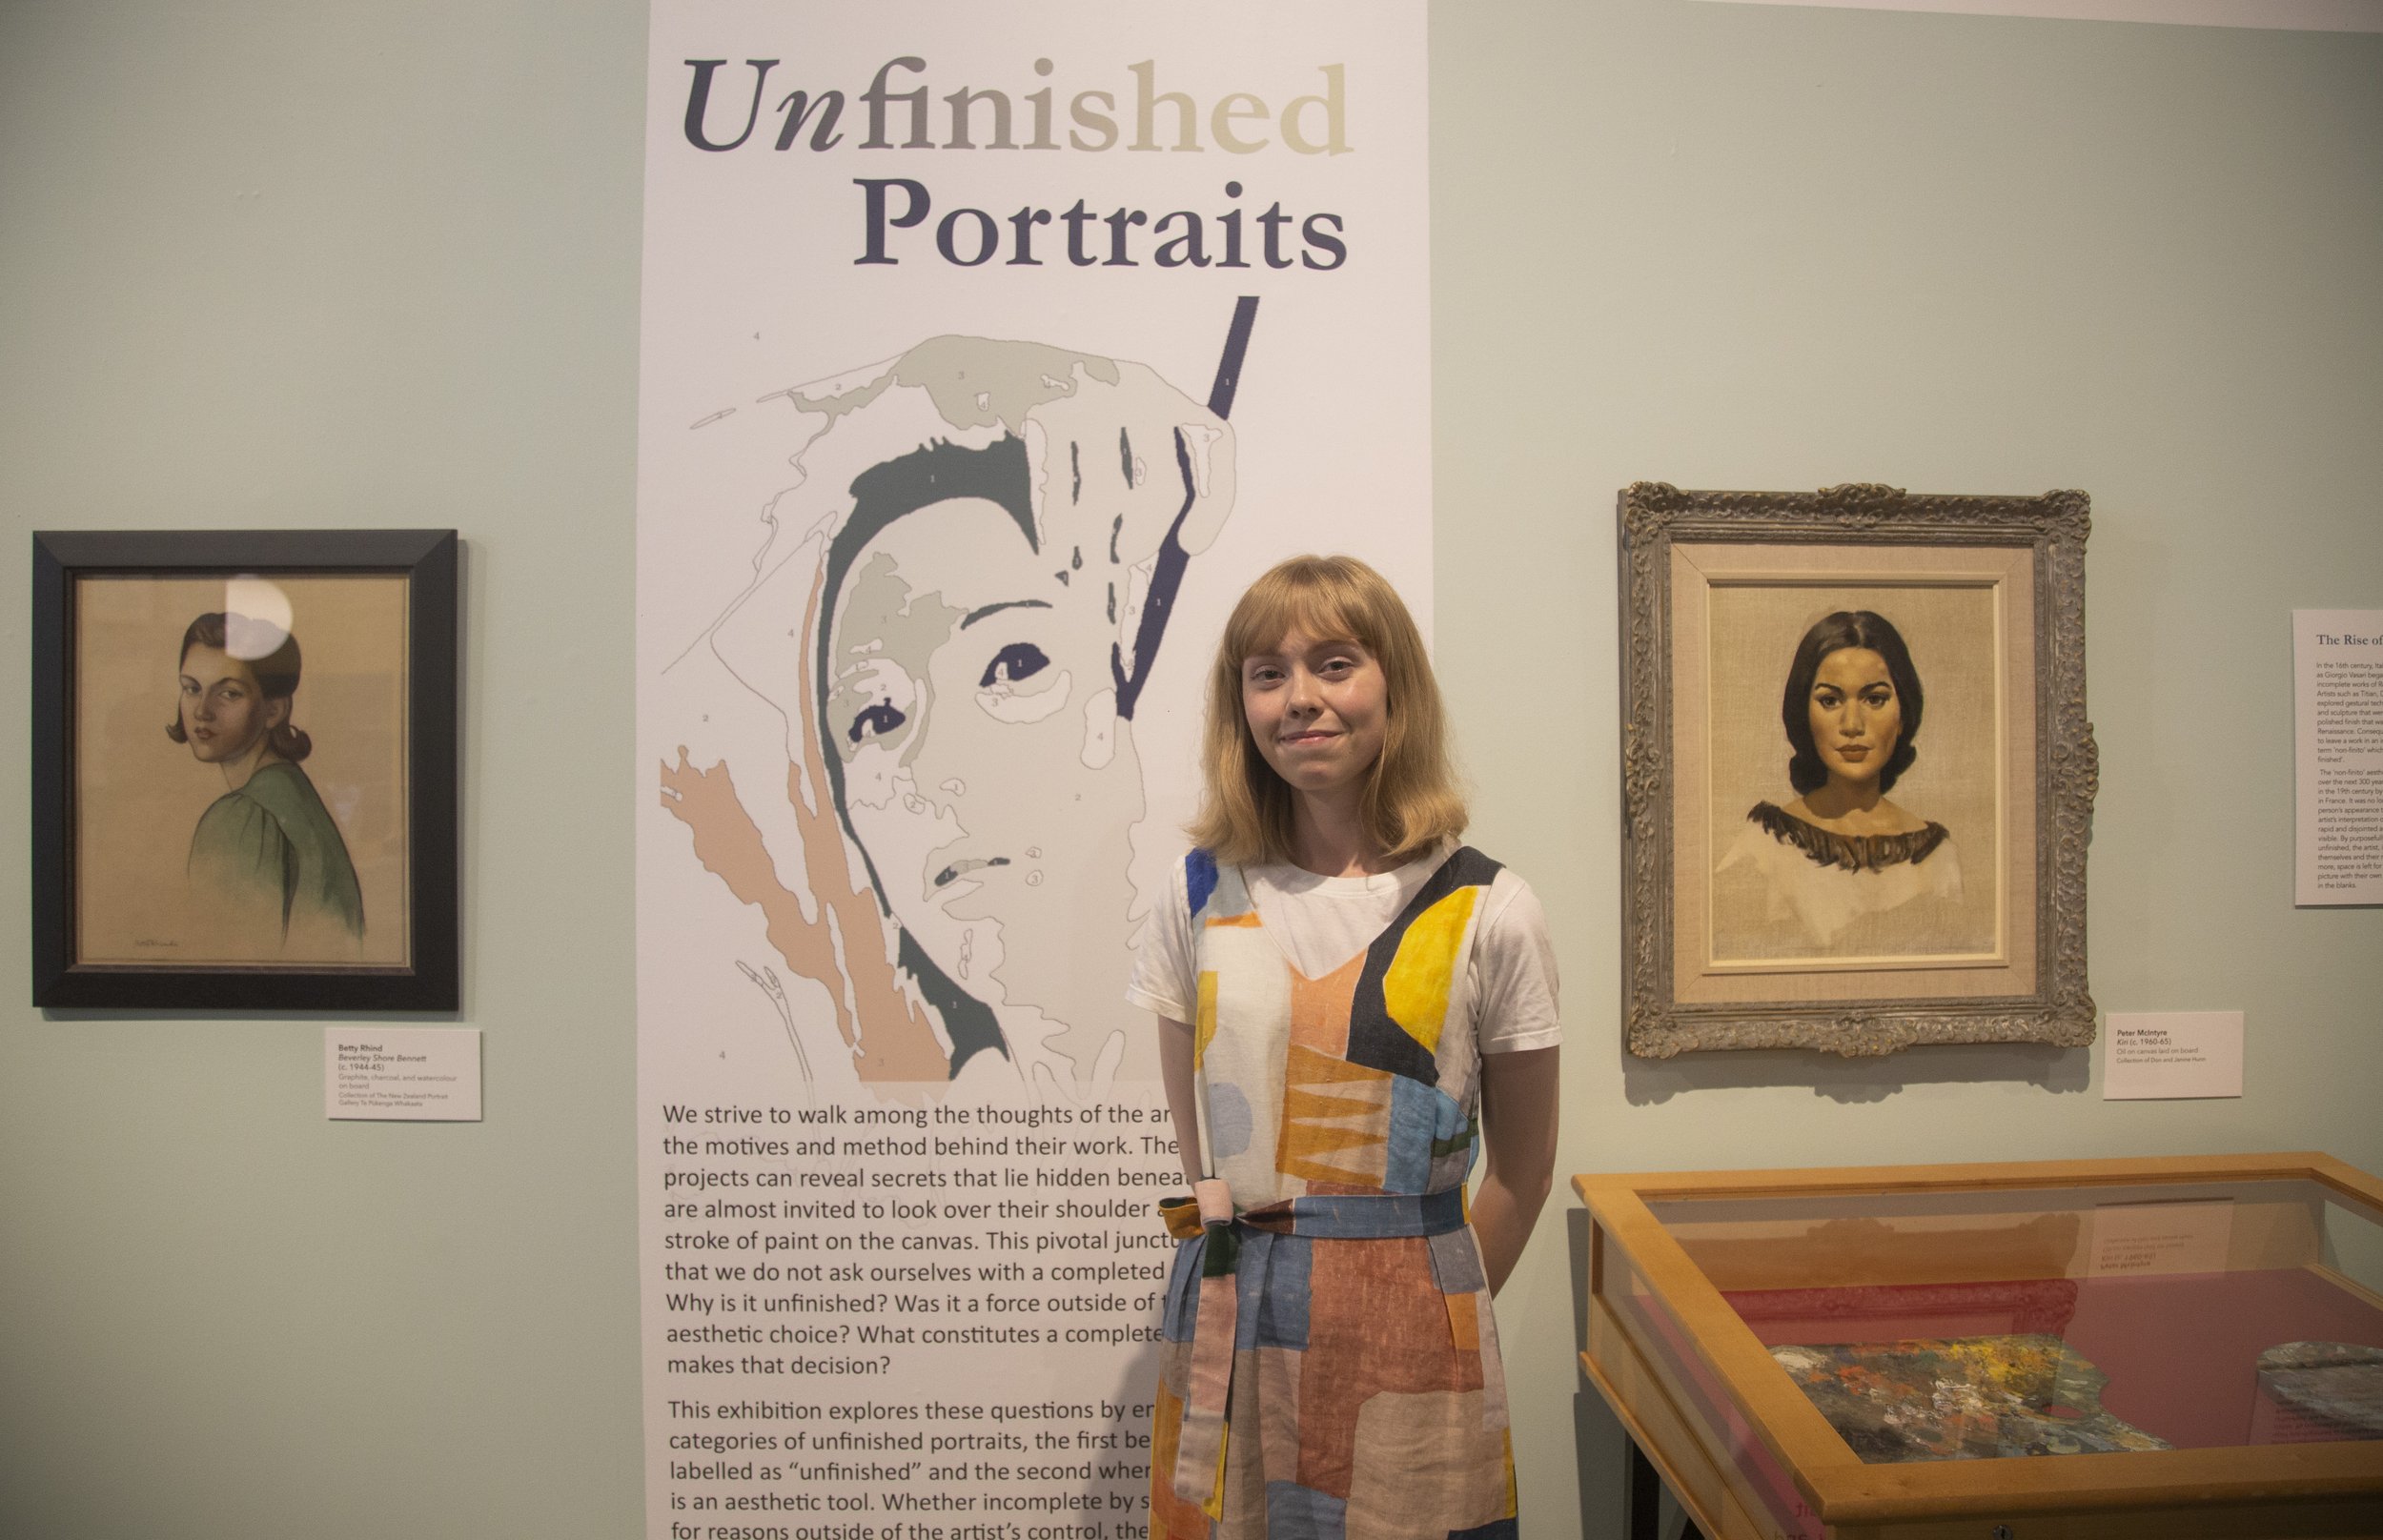 Curatorial Intern Lizzie Errington, Curator of Unfinished Portraits